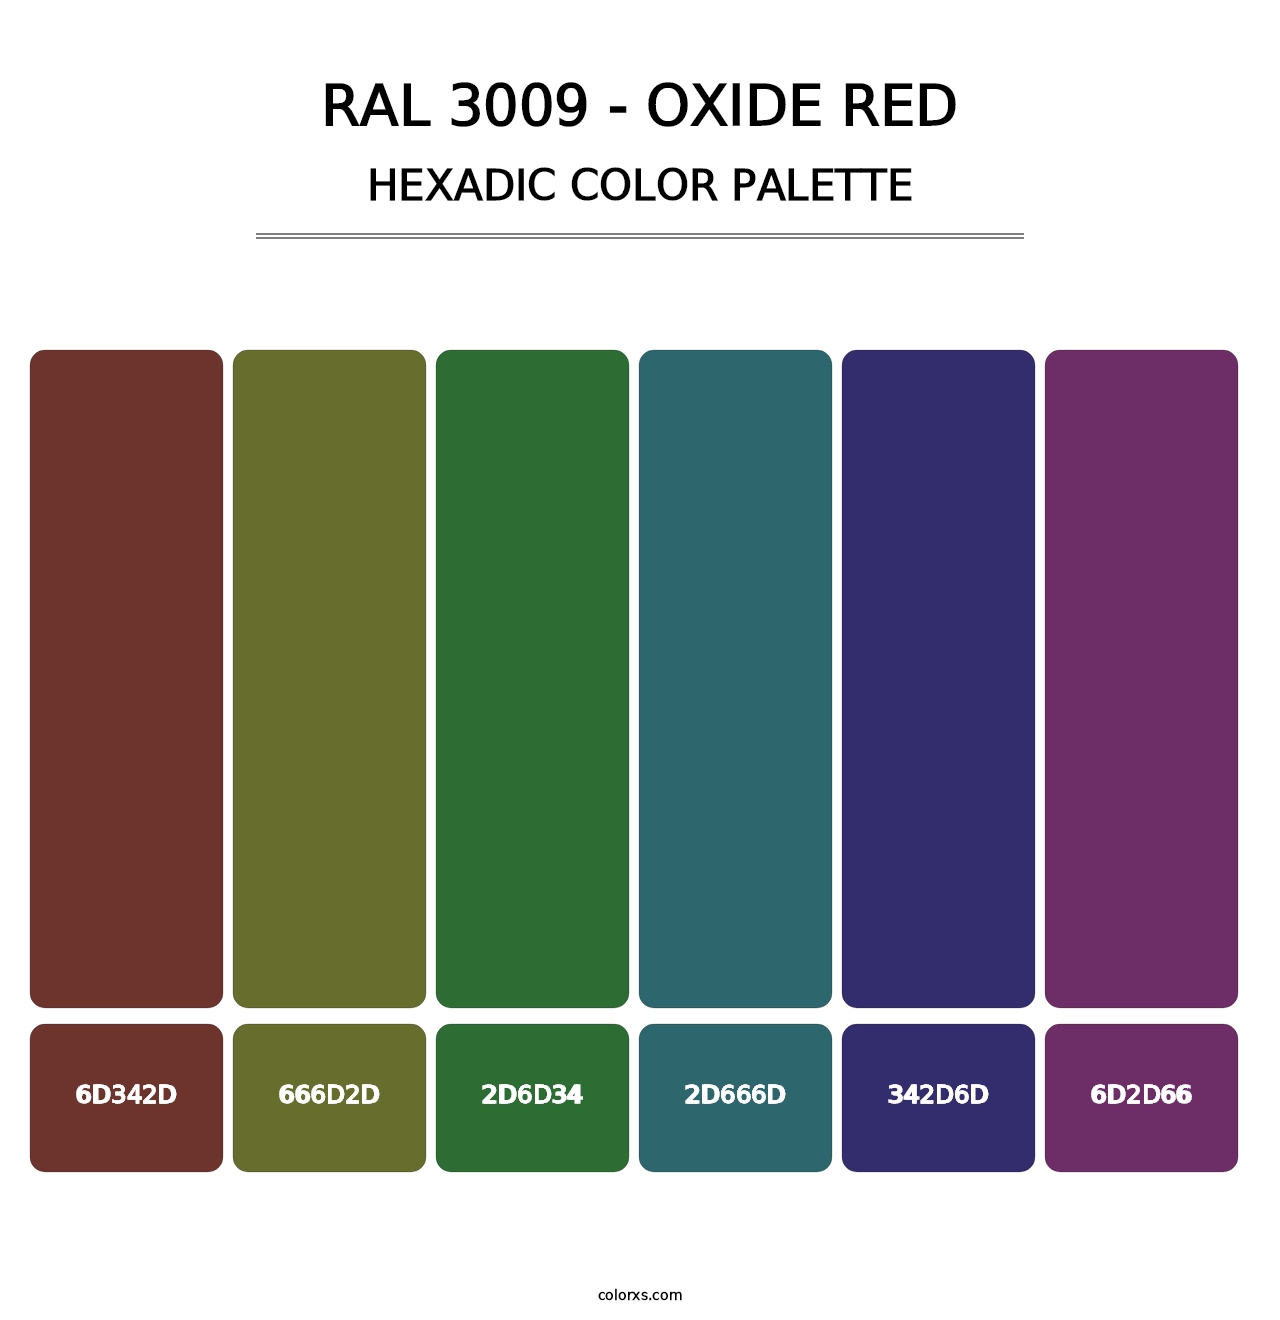 RAL 3009 - Oxide Red - Hexadic Color Palette